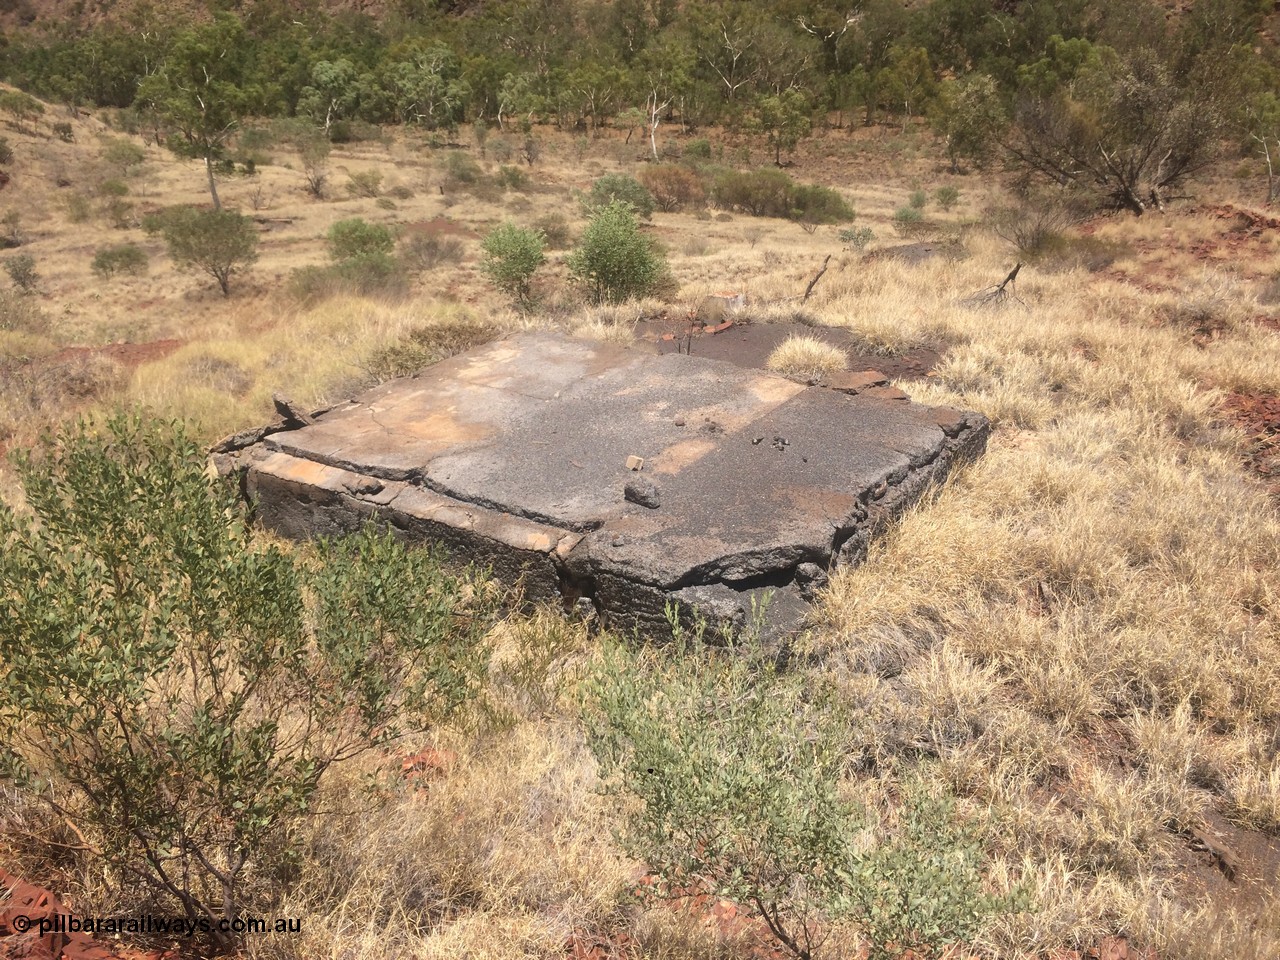 160101 2298
Wittenoom Gorge, location of former power station, shows old concrete and asbestos foundations, original location of a water tank, looking north west from approx. engine hall location, geodata: [url=https://goo.gl/maps/4DiafEh6UHR2] -22.3220500 118.3339917 [/url], iPhone 5S image.
